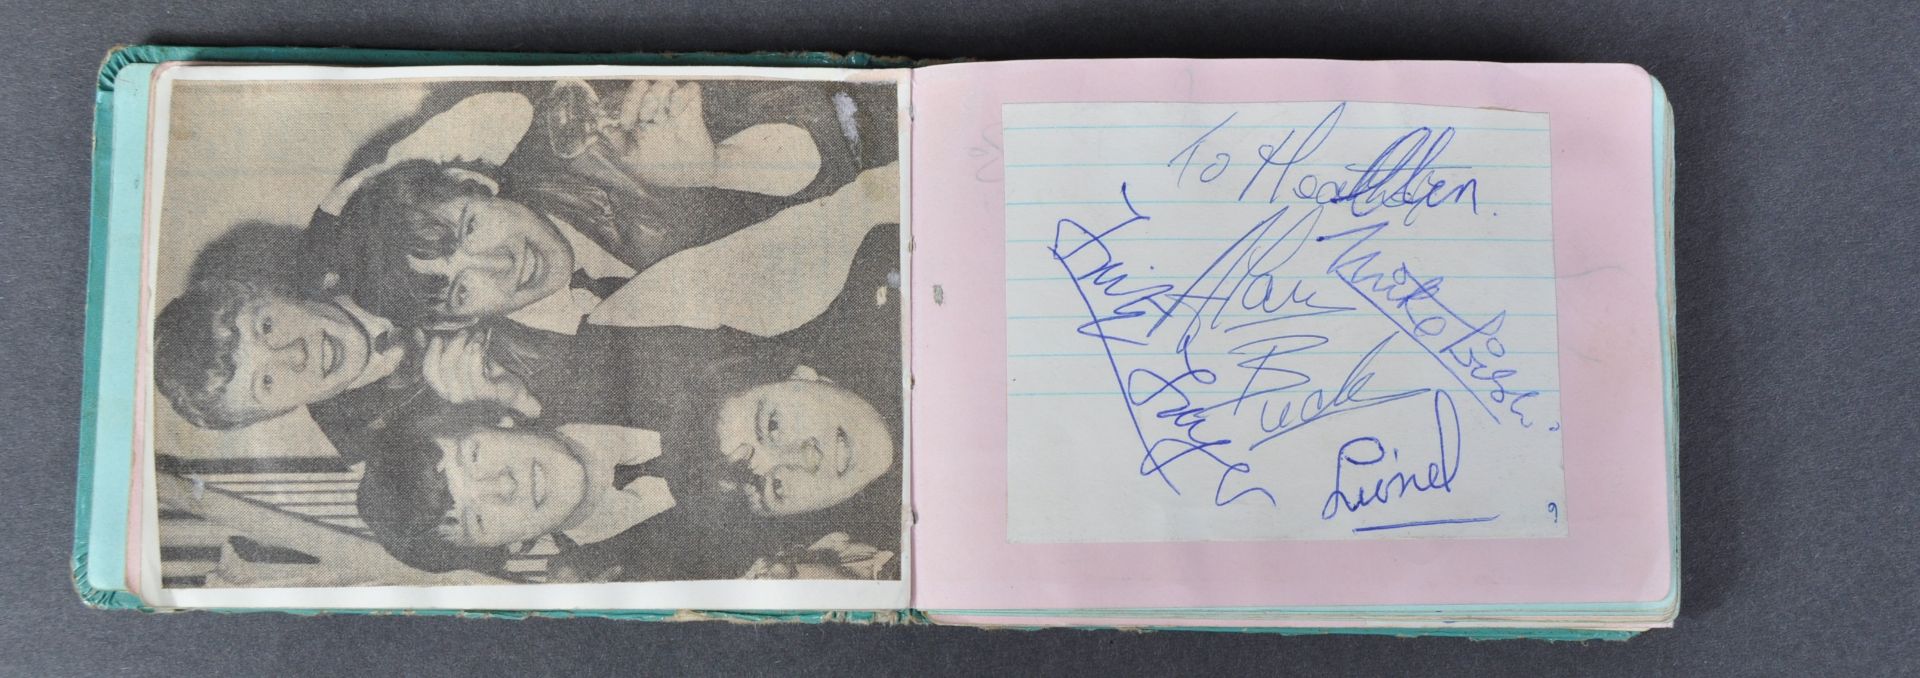 1960S MUSIC AUTOGRAPH ALBUMS - OBTAINED FROM DISCS-A-GOGO - Image 14 of 31